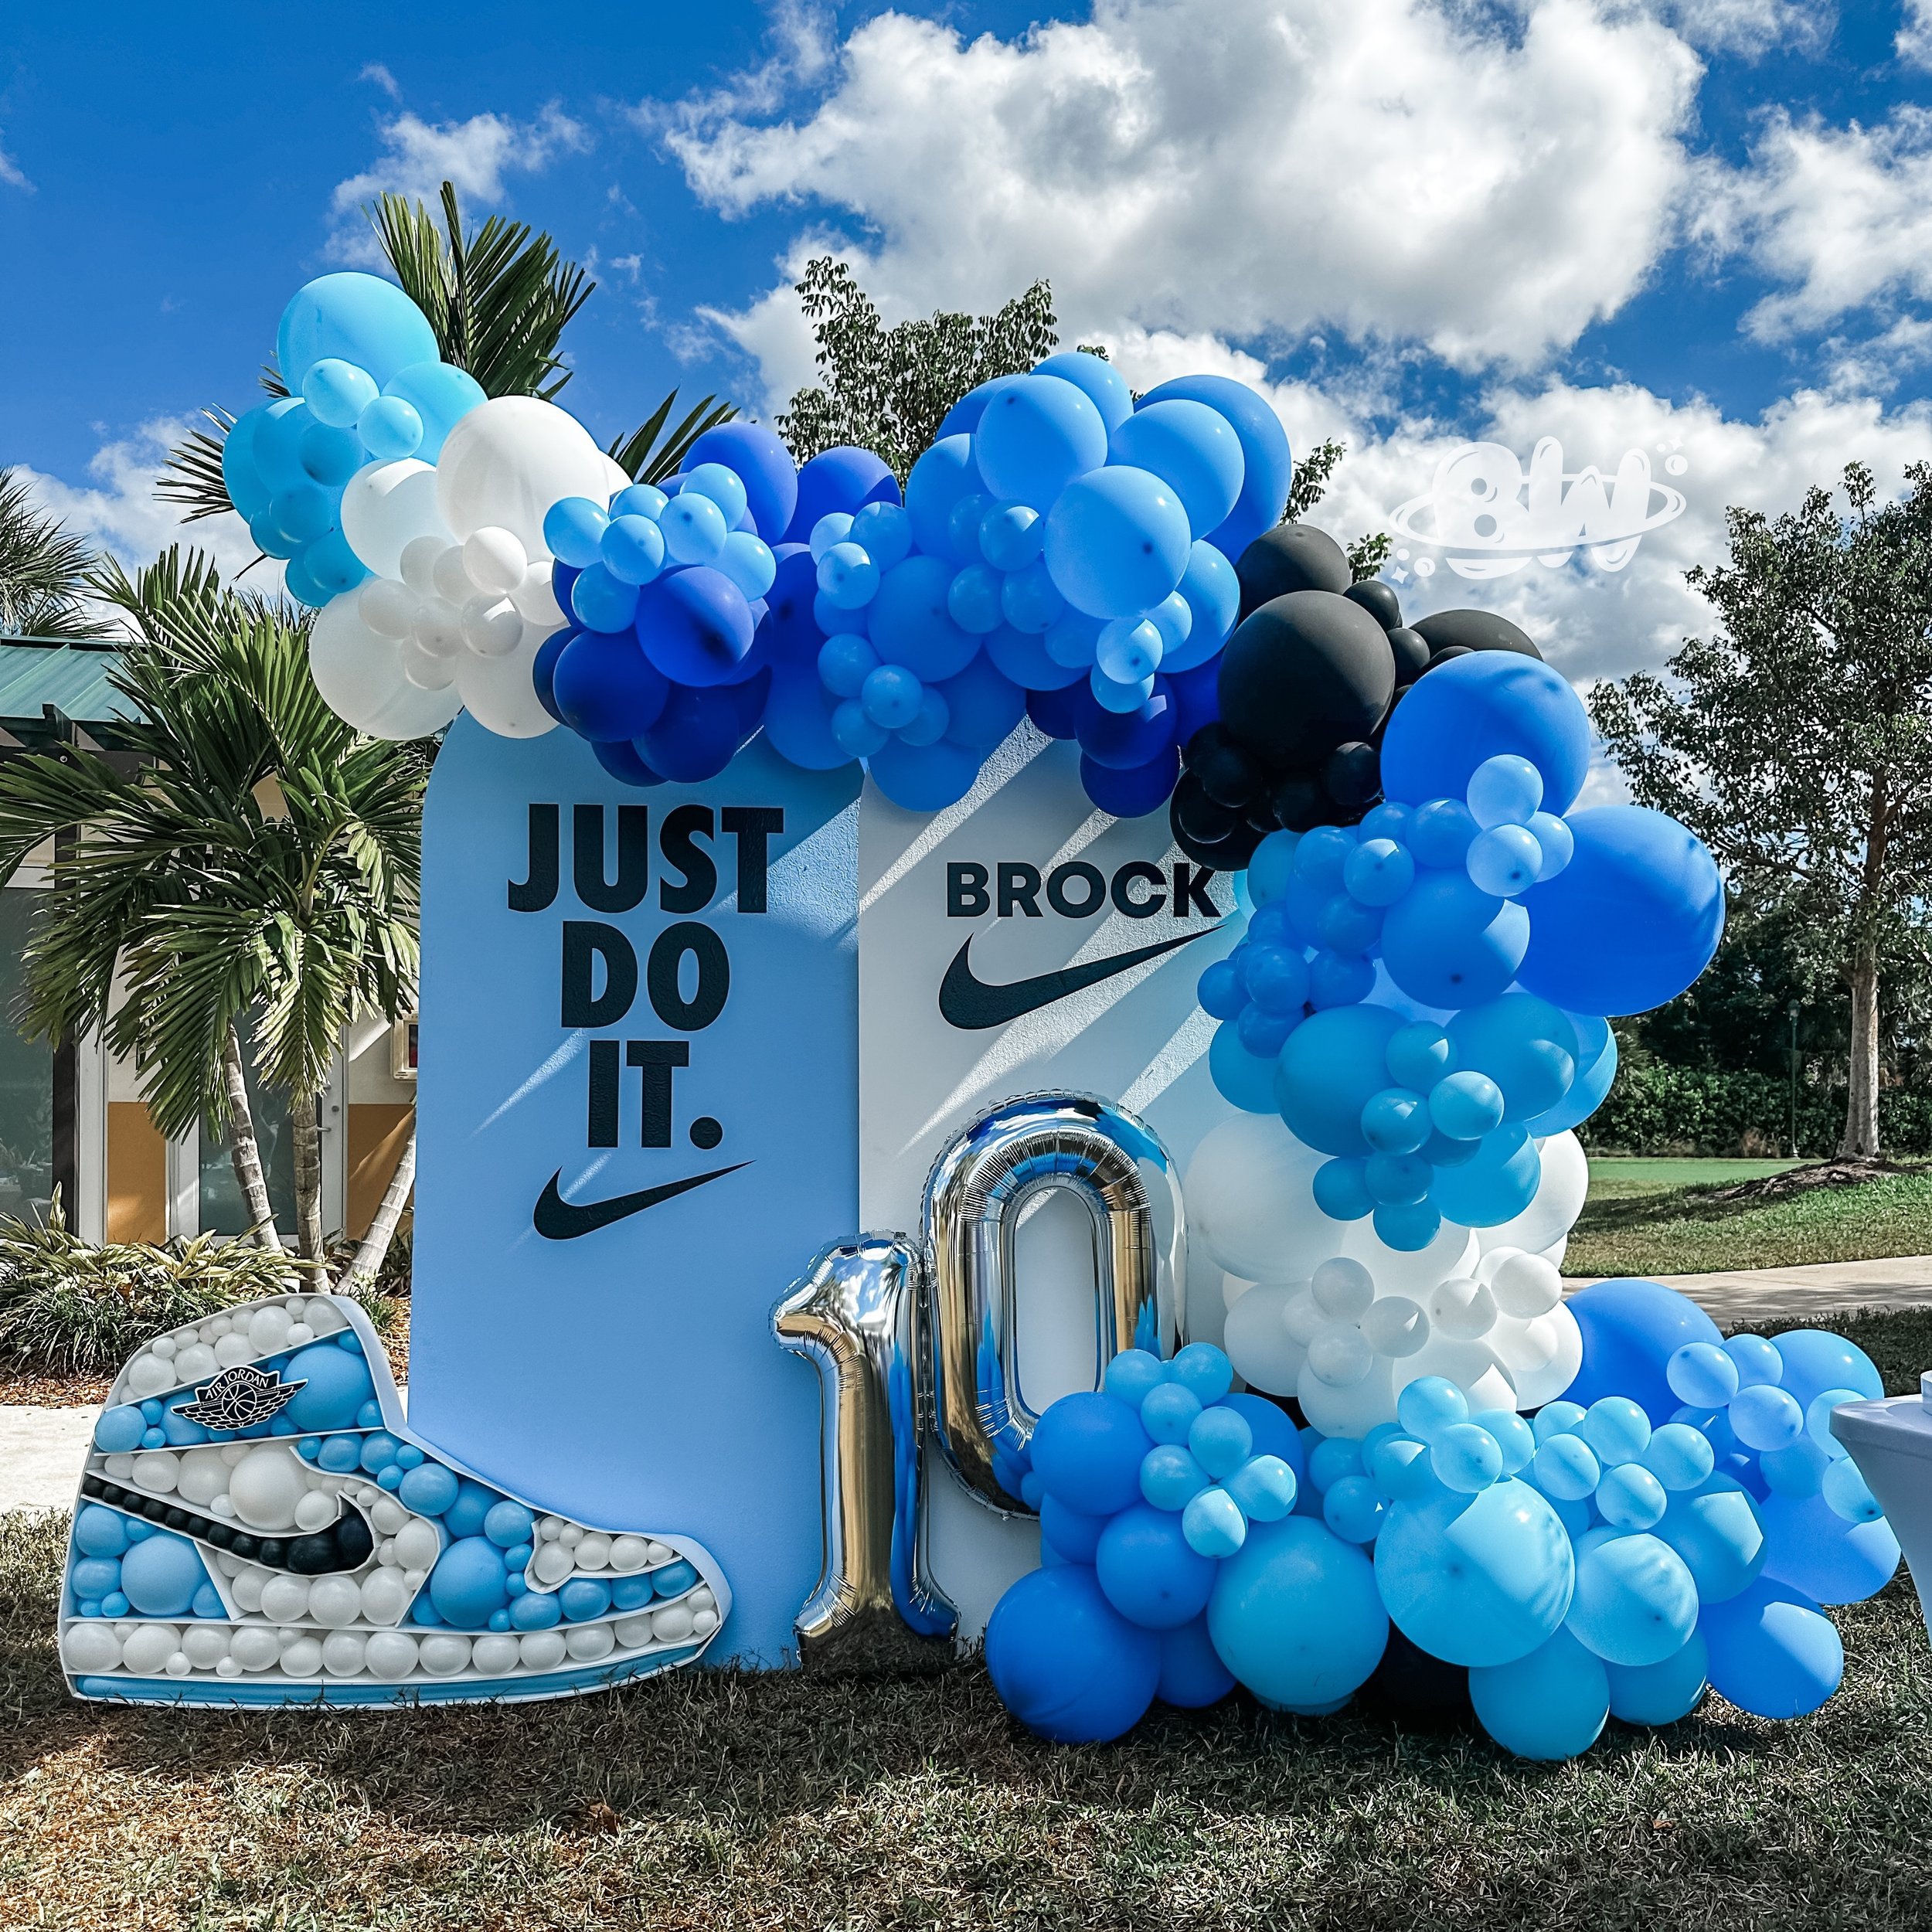 JUST DO IT ✅ and we did it! Amazing setup! Loved this creative work 👟 🎈🎈🎈🎈🎈👍🏼👍🏼👍🏼 
Nike balloons with Nike backdrop and Nike shoe balloon mosaic 🤩🤩🤩🤩
#miamiballoons #fortlauderdaleballoons #miamiparty #browardevents #miamievents